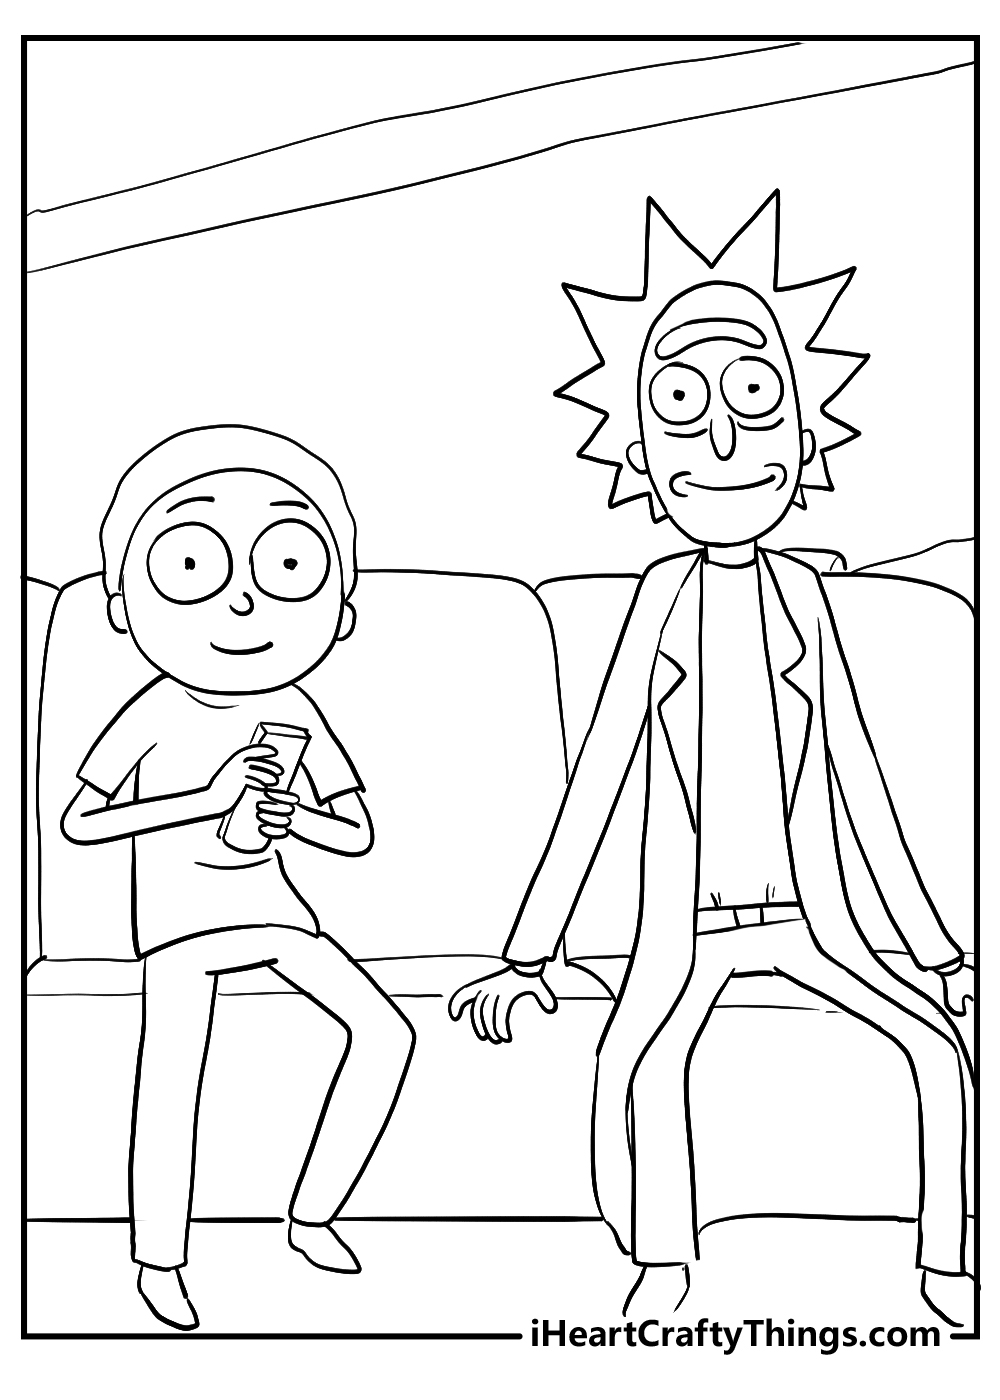 original rick and morty coloring pages